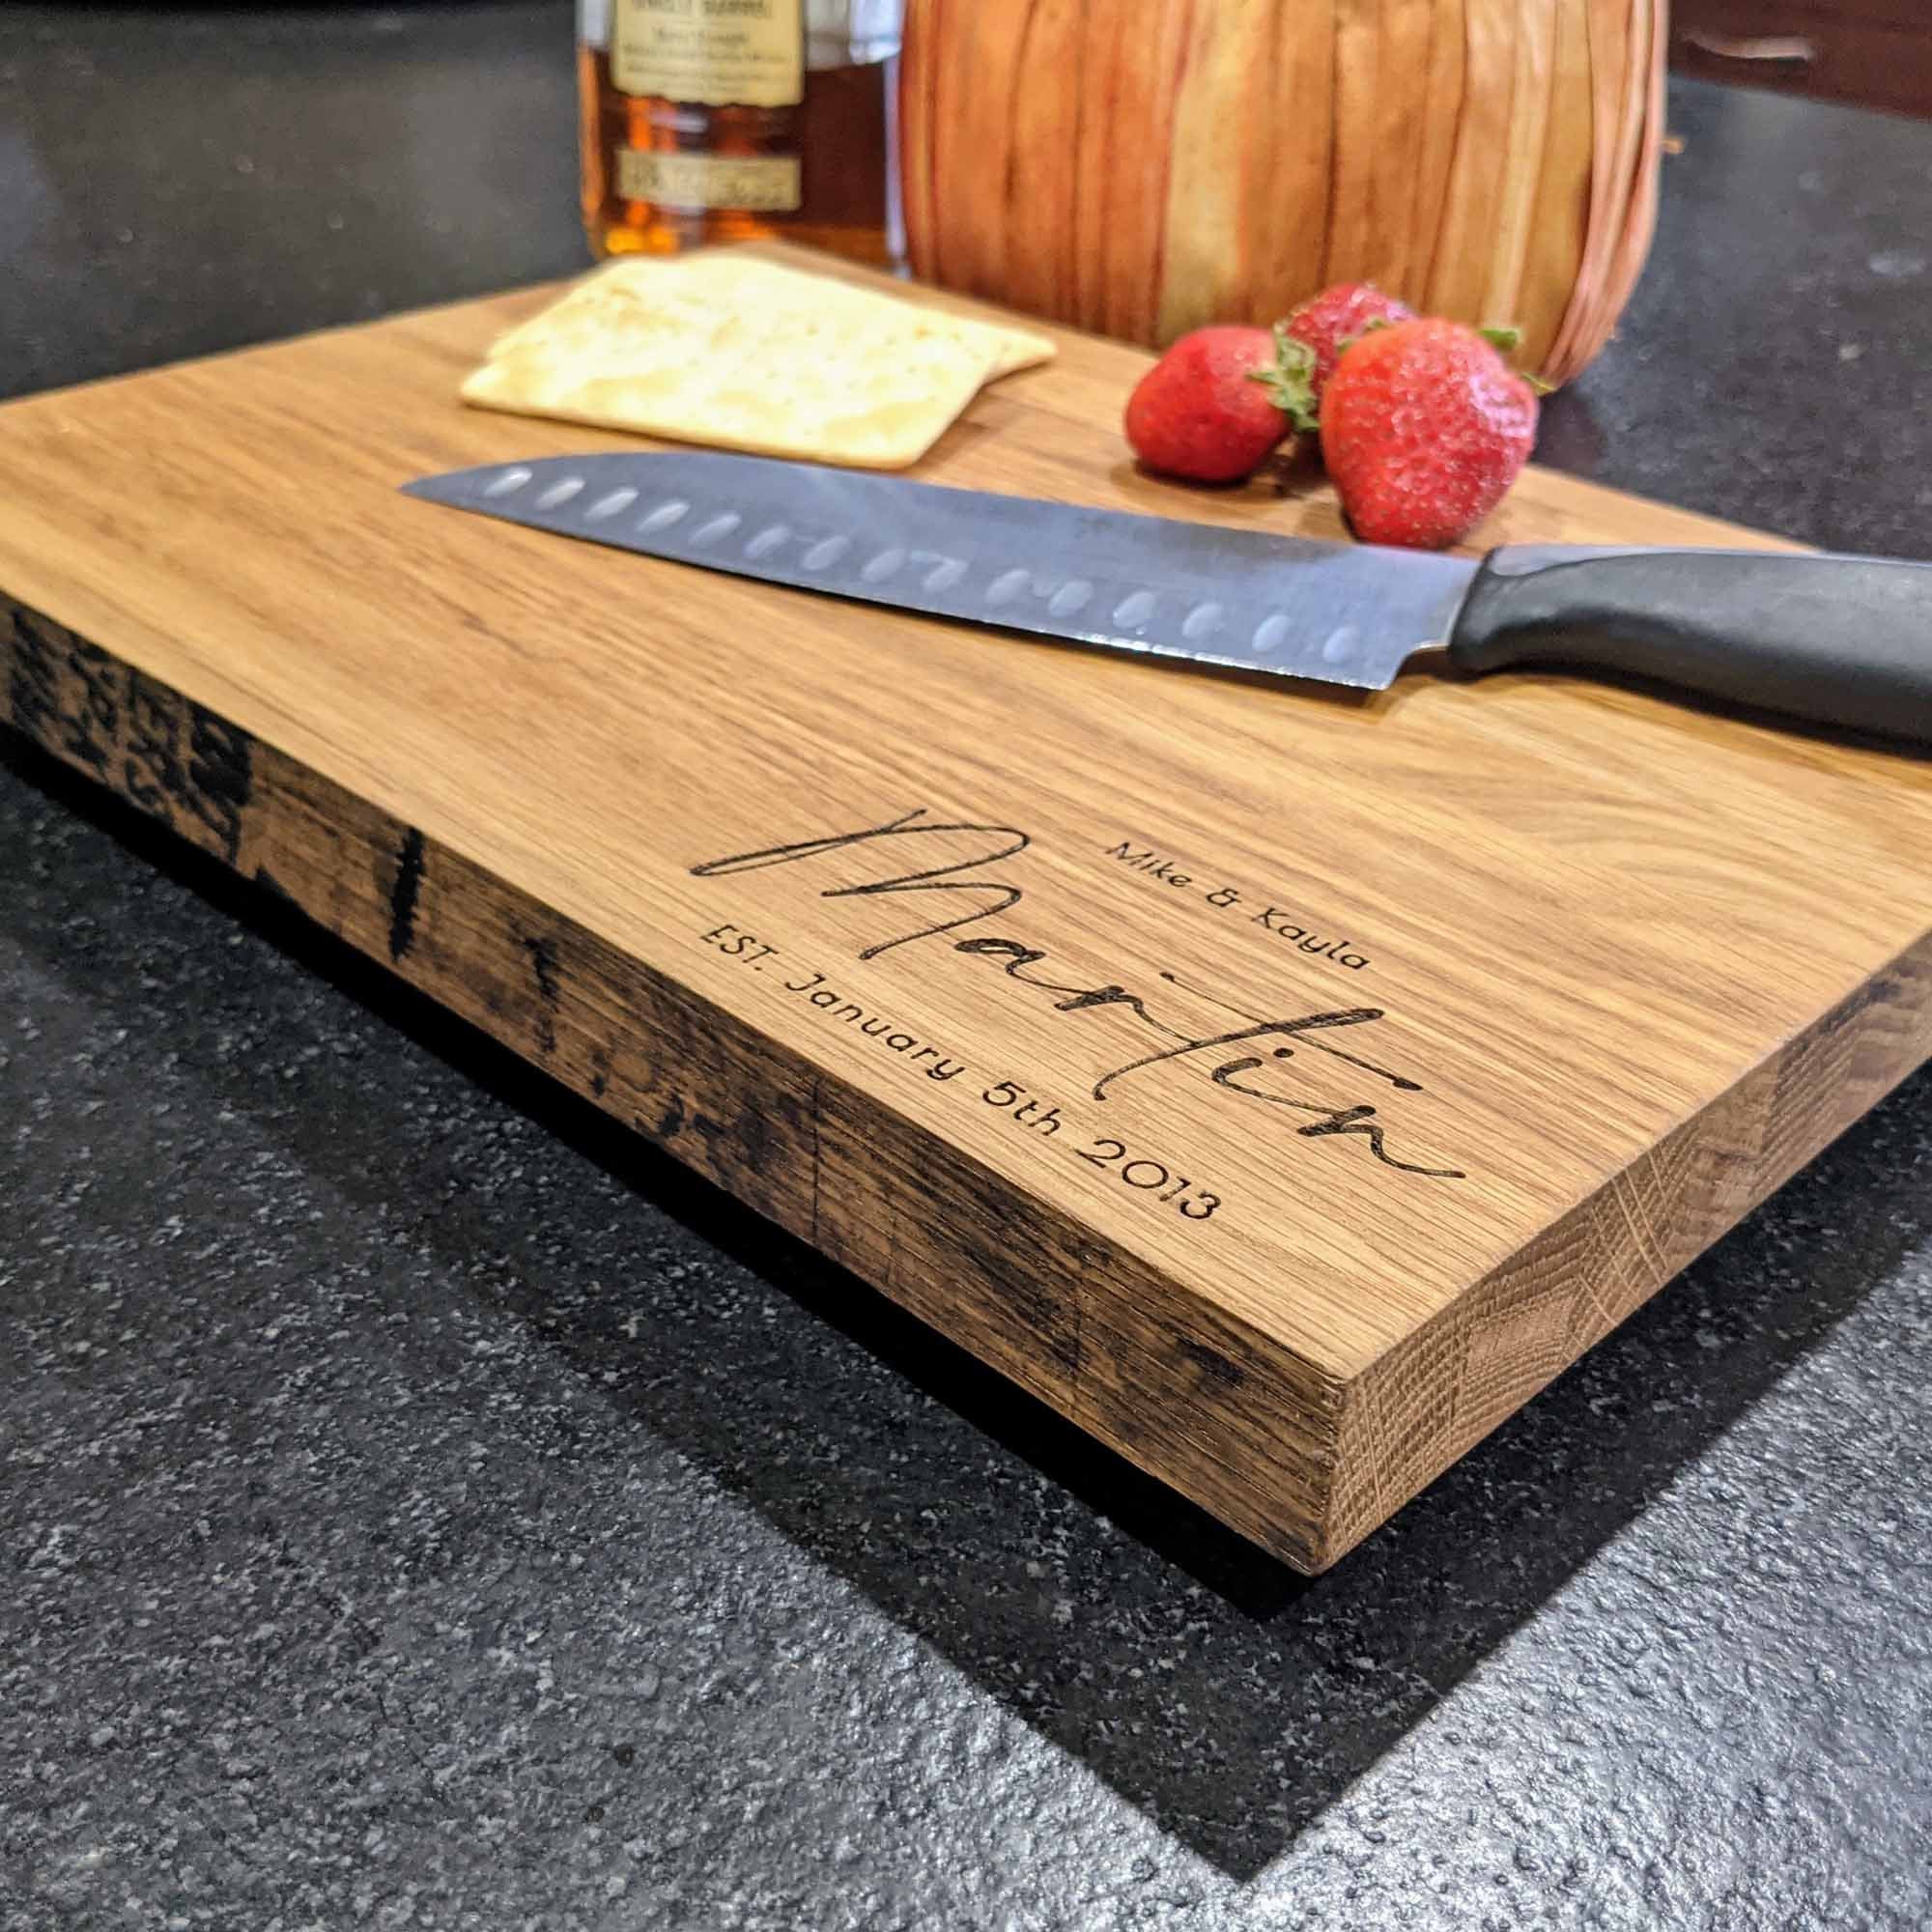 Bourbon Barrel Charcuterie & Cheese Board With Handle